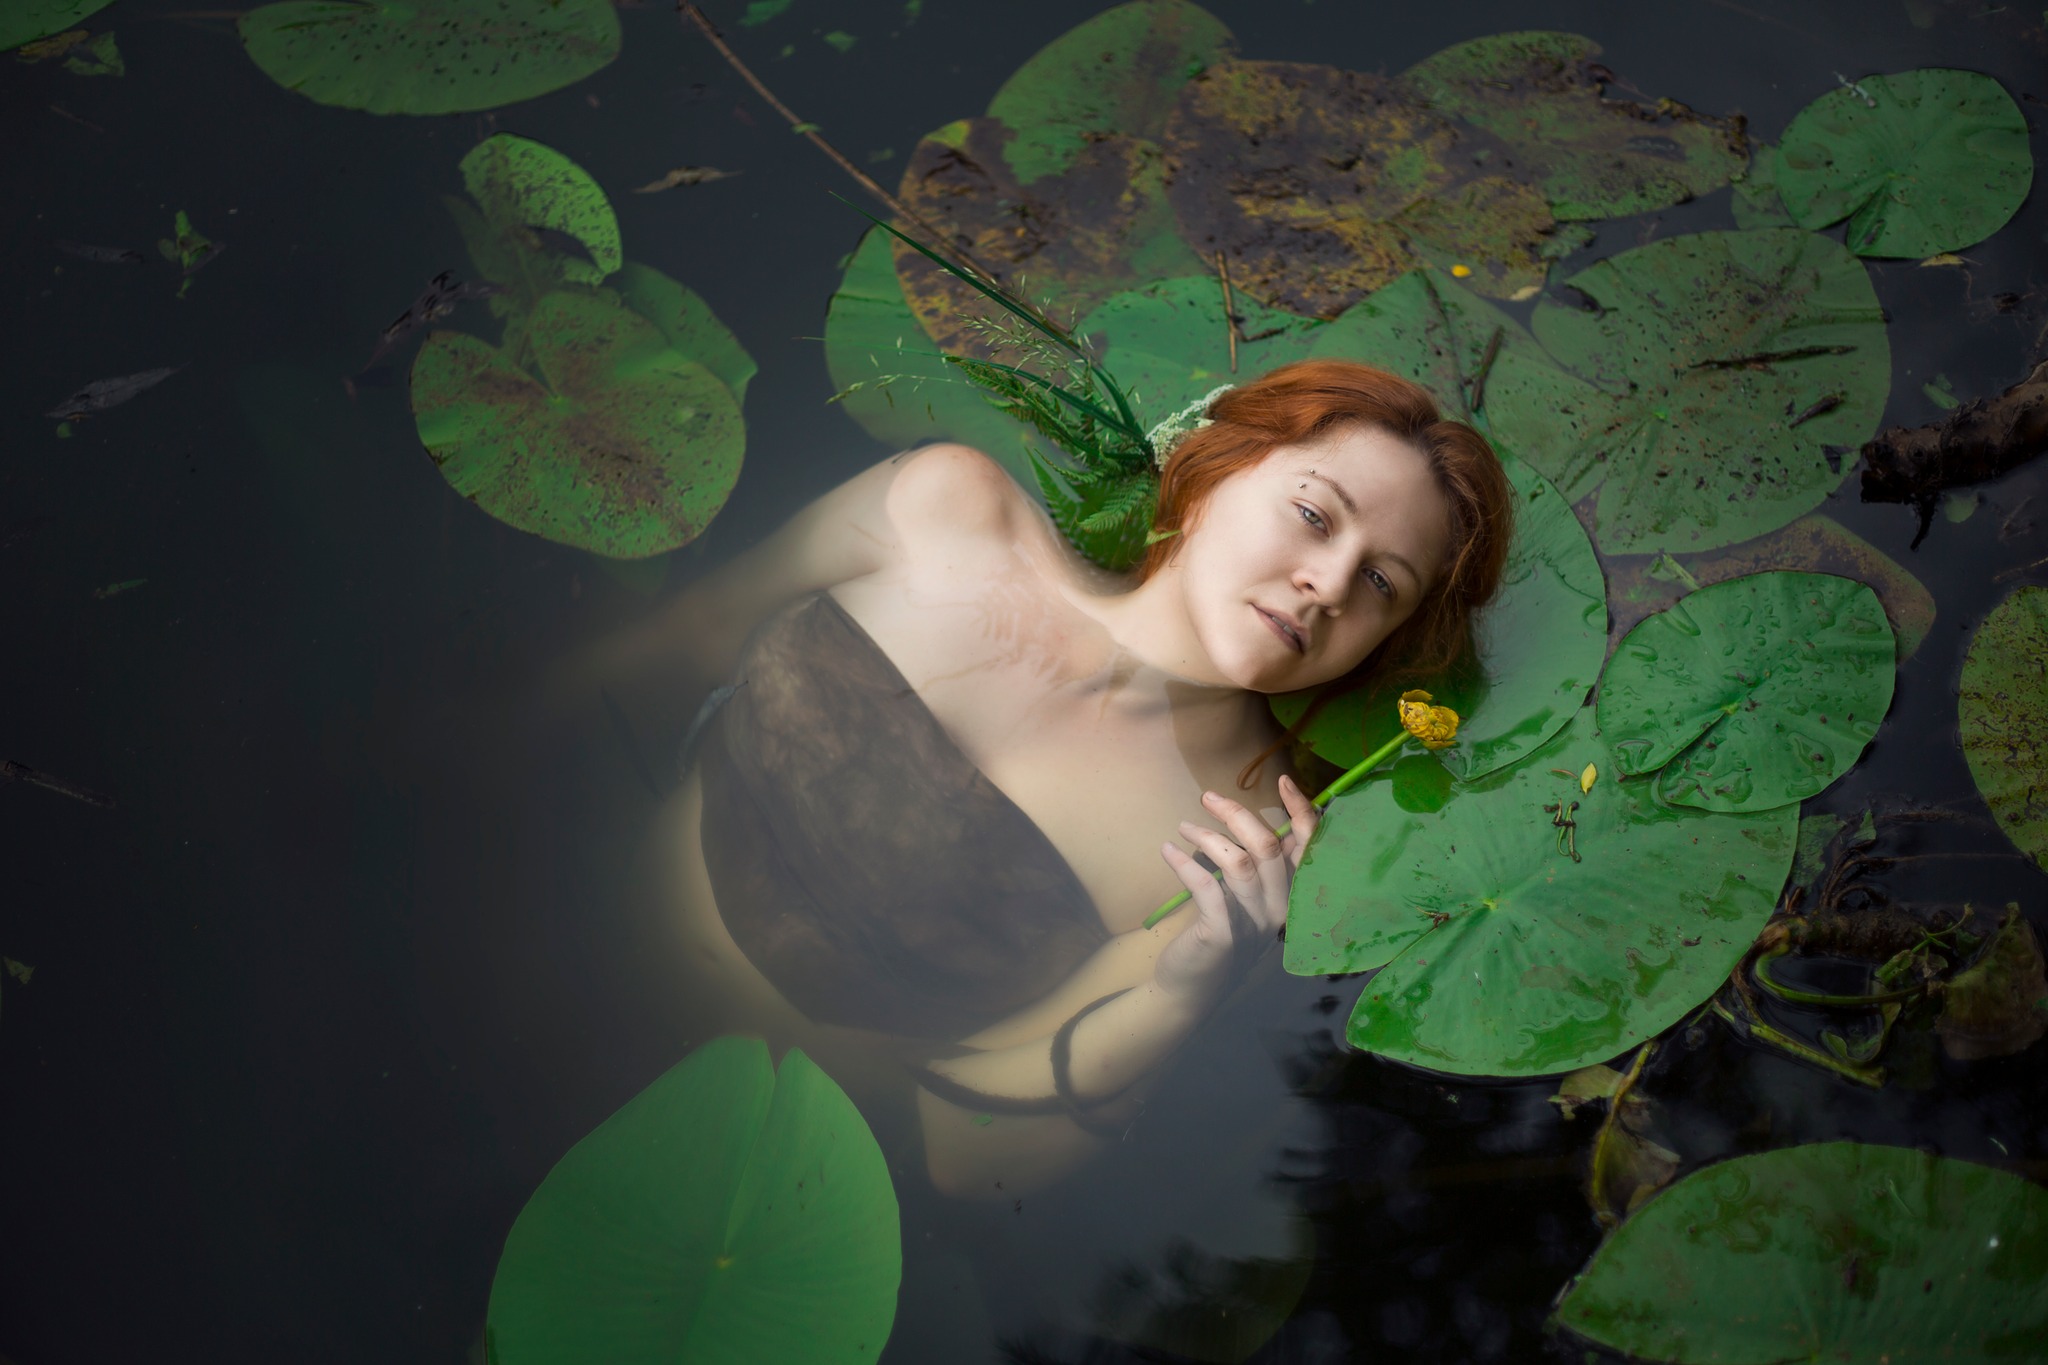 water nymph with ginger hair chilling in water with flower in her hand